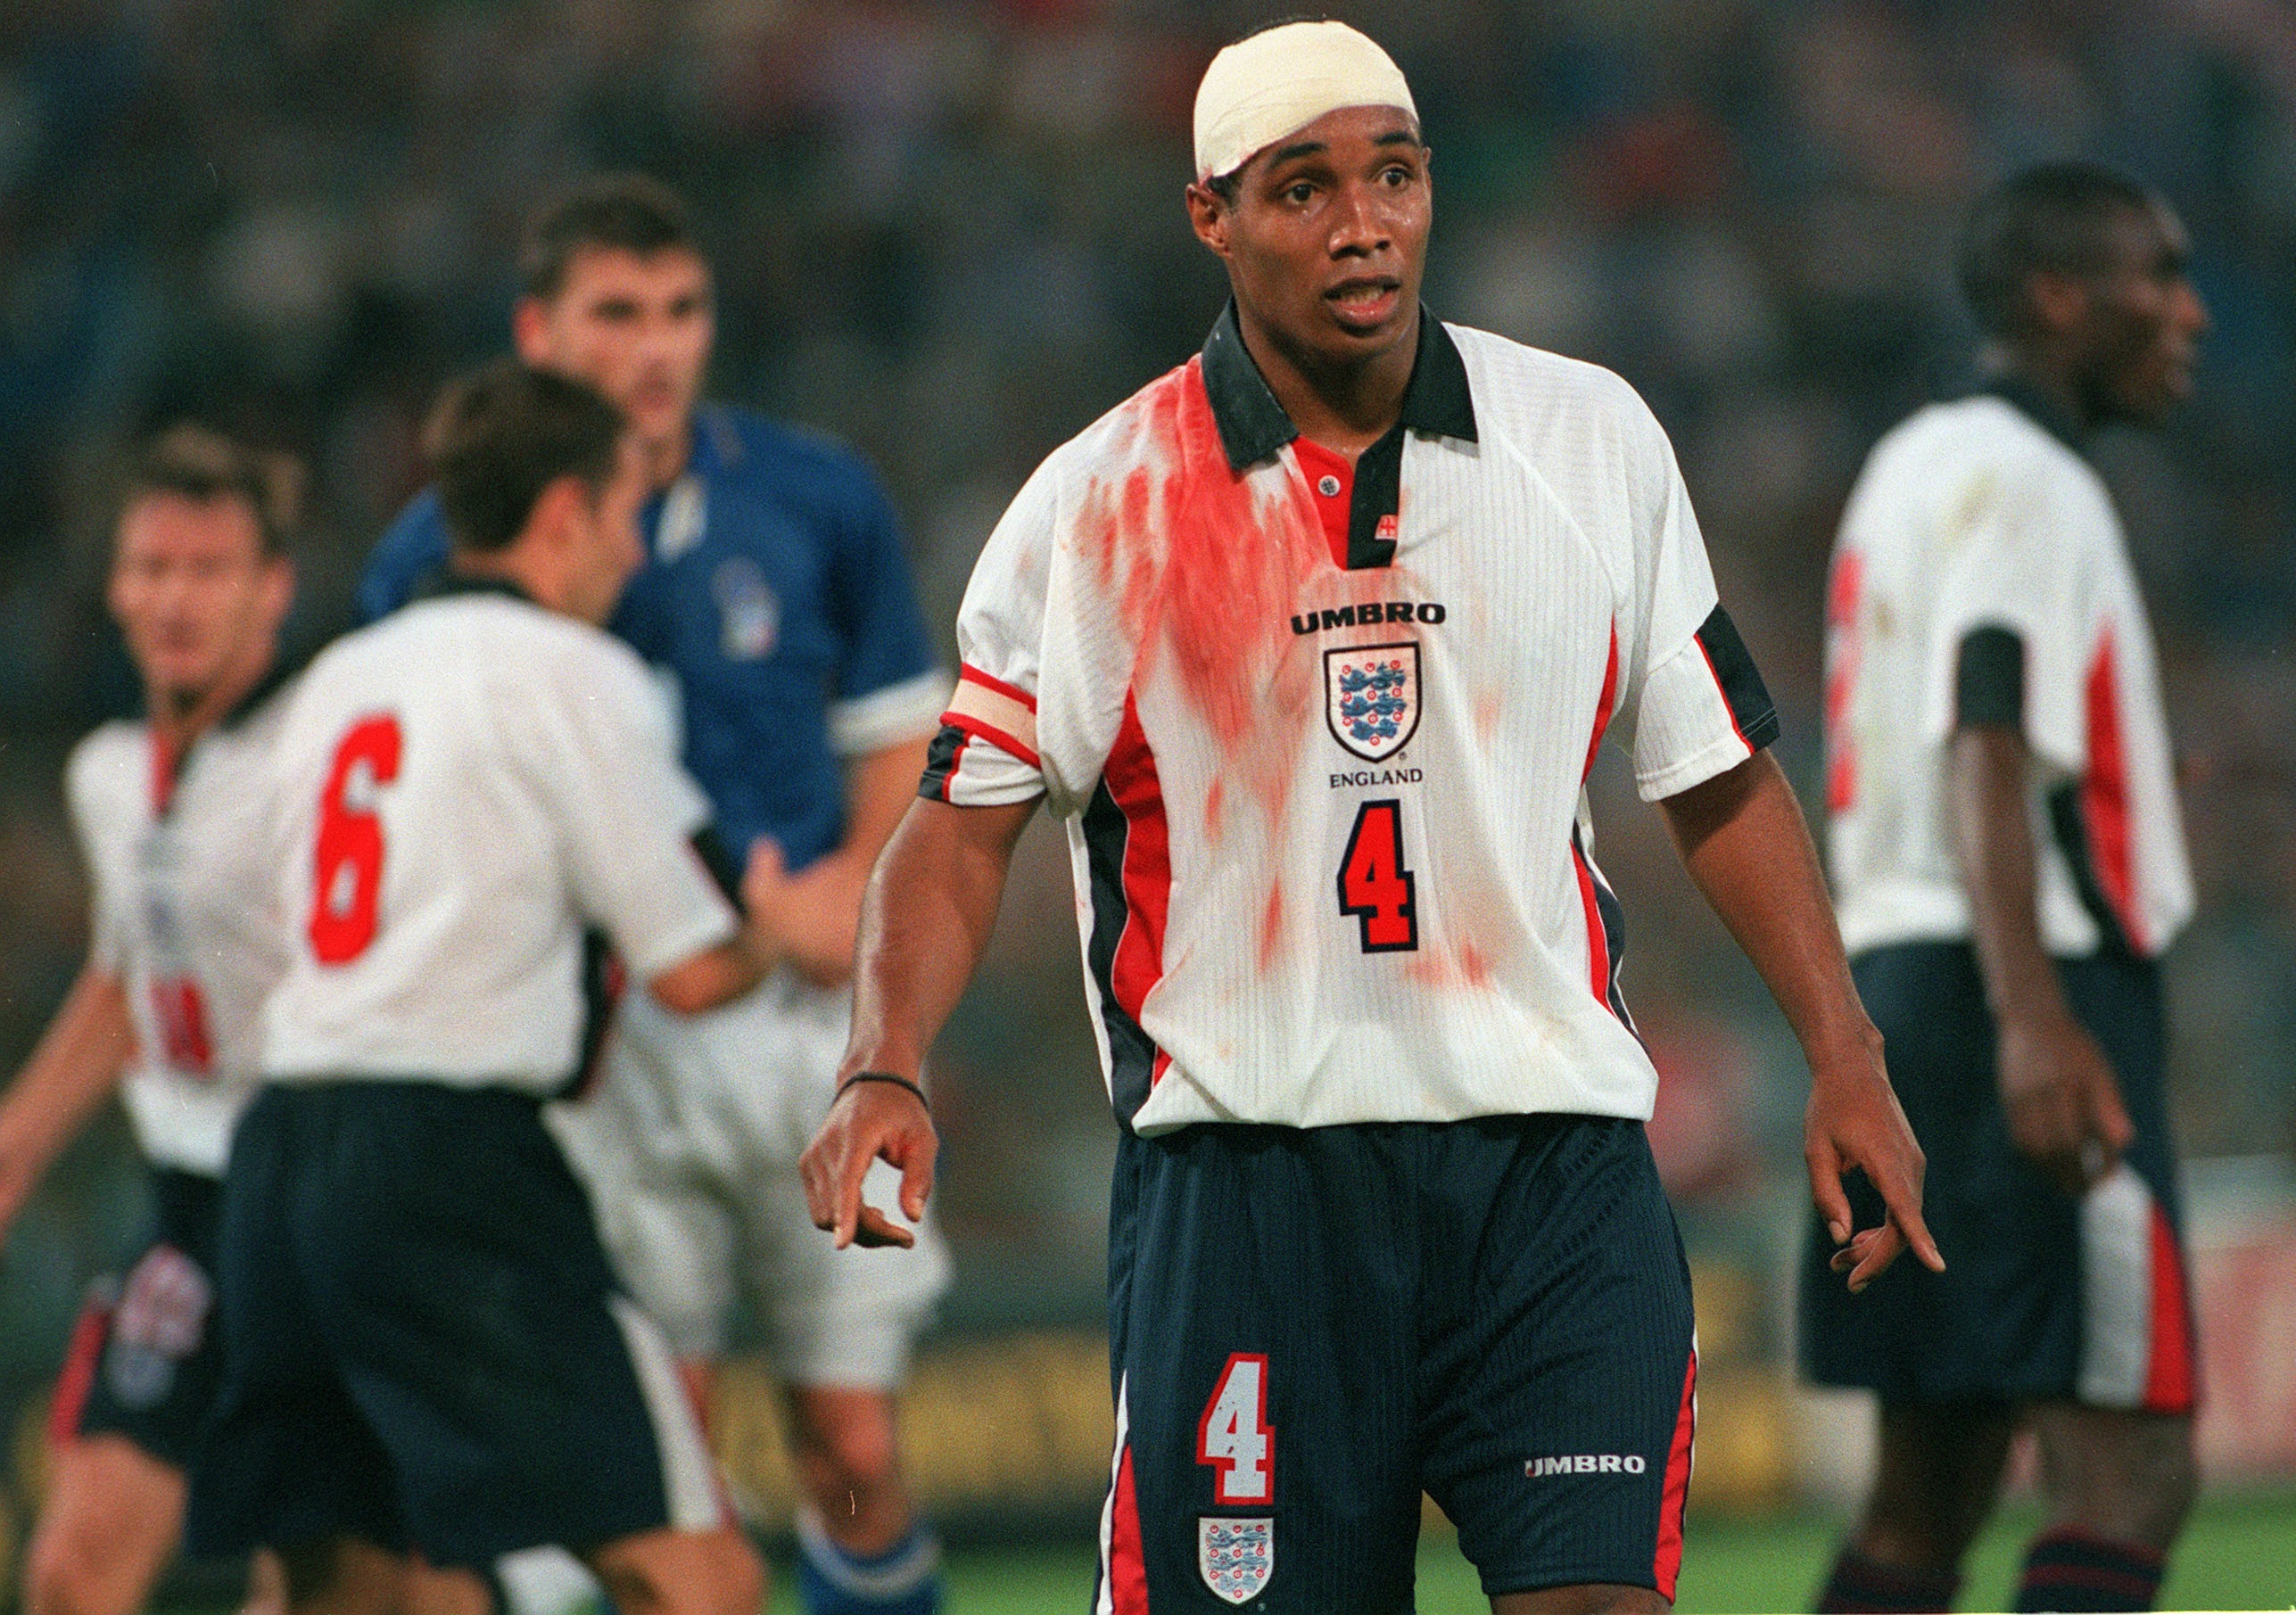 Paul Ince with a head injury during the 1997 World Cup